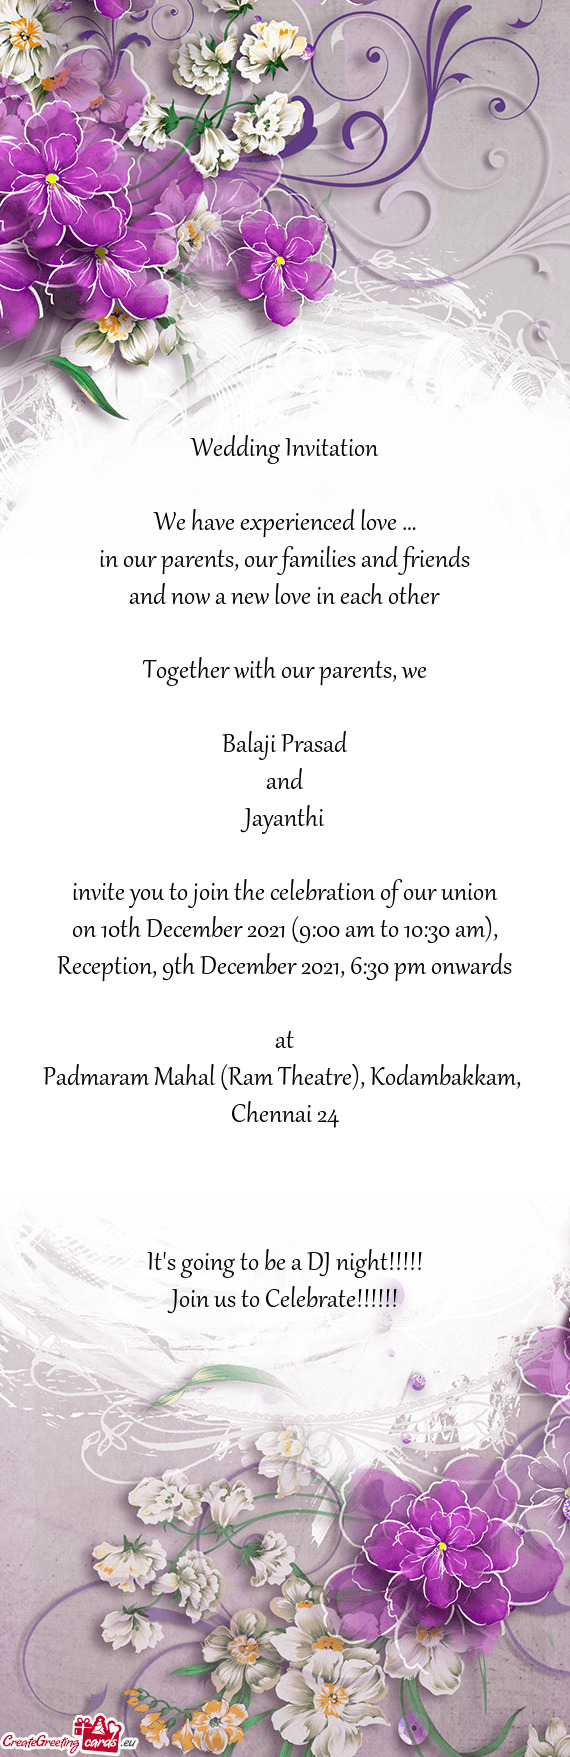 Invite you to join the celebration of our union